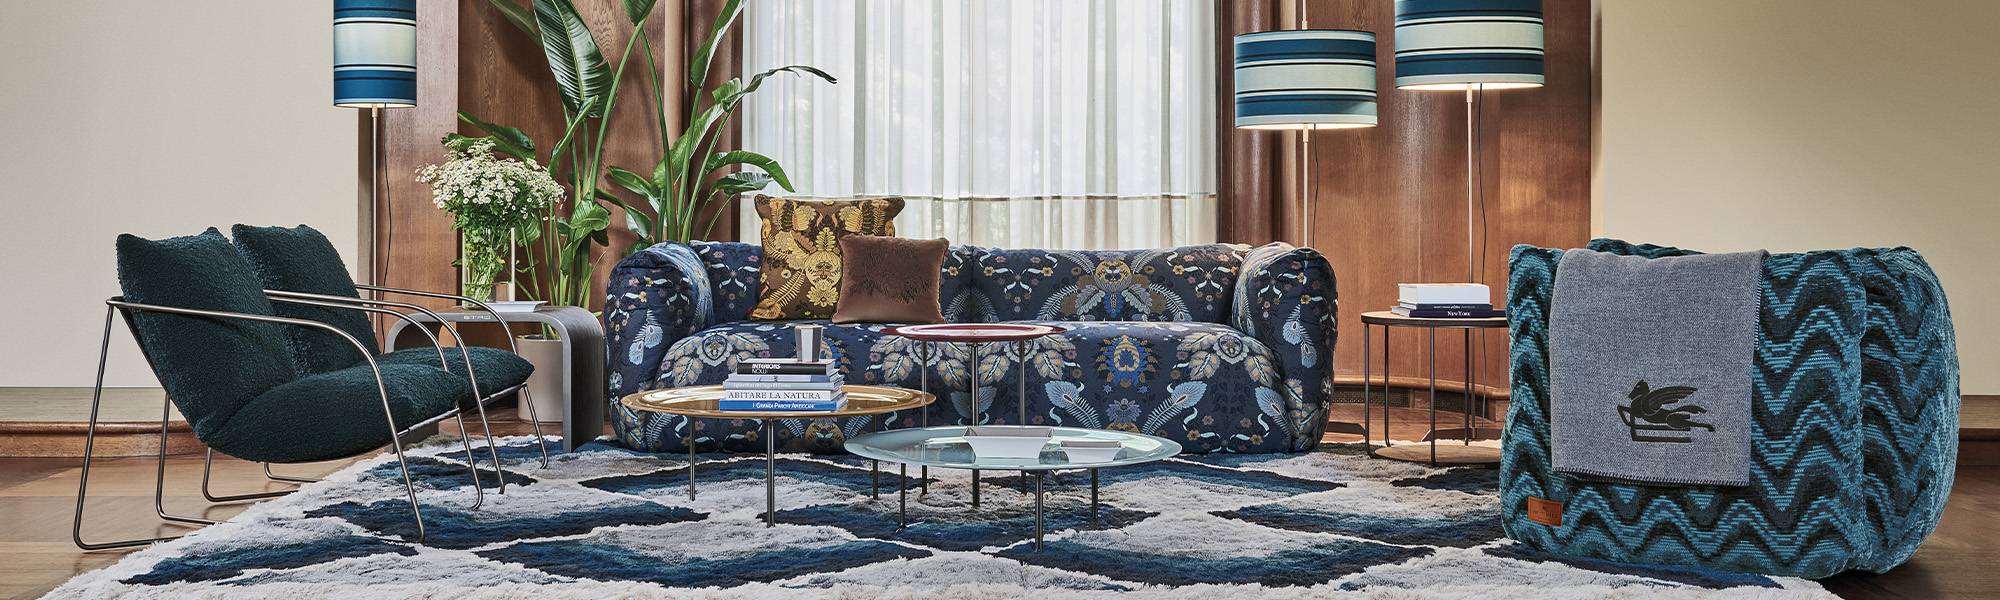 Etro Home Interiors_Armchairs_Banner_2